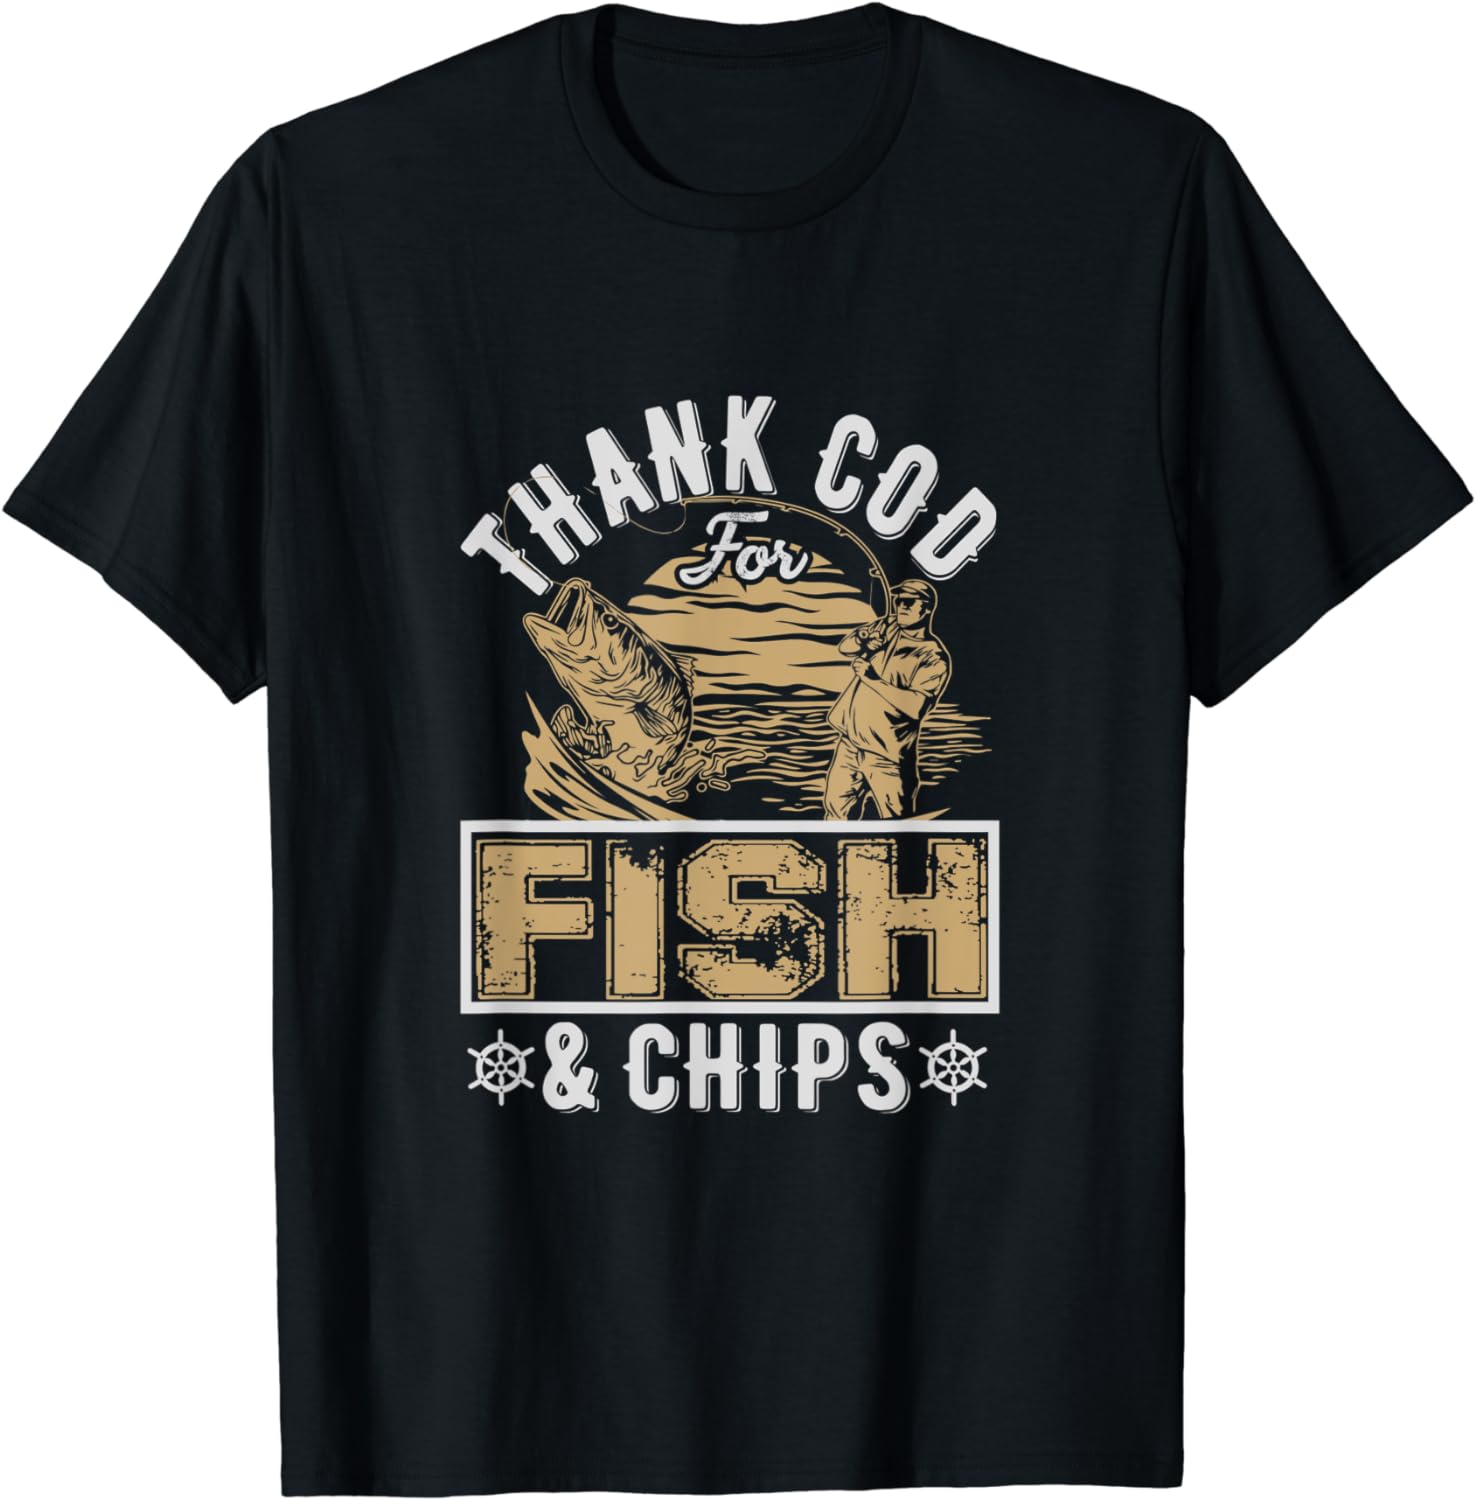 Thank Cod for Fish and Chips T-Shirt